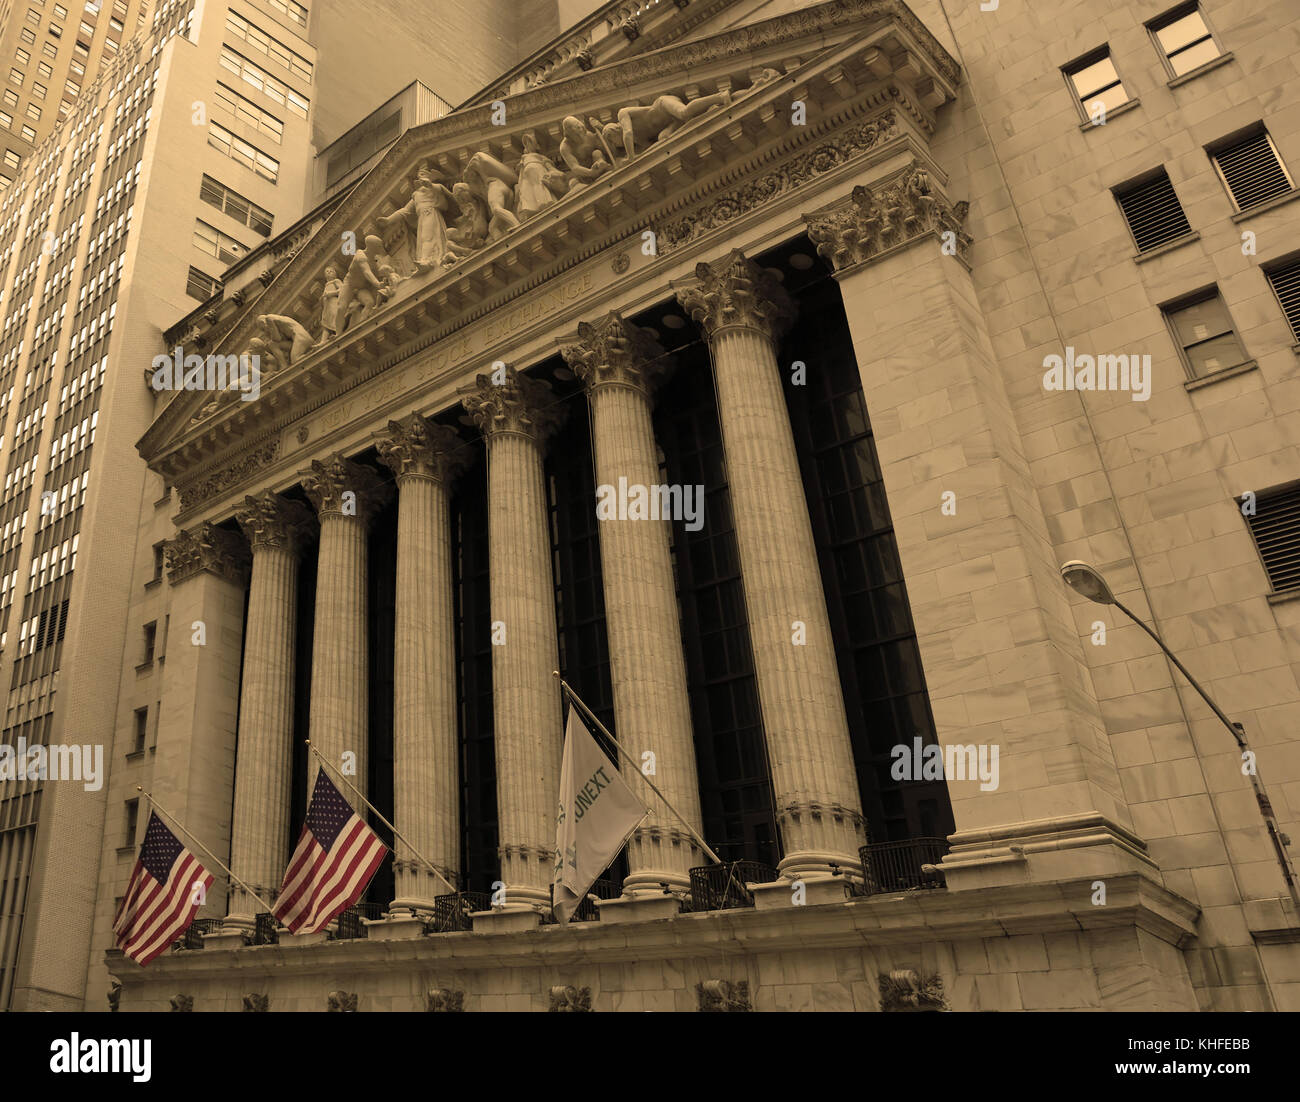 NEW YORK CITY, NY - AUG 8: Wall Street New York Stock Exchange is the world's largest stock exchange by market capitalization of its listed companies. Stock Photo